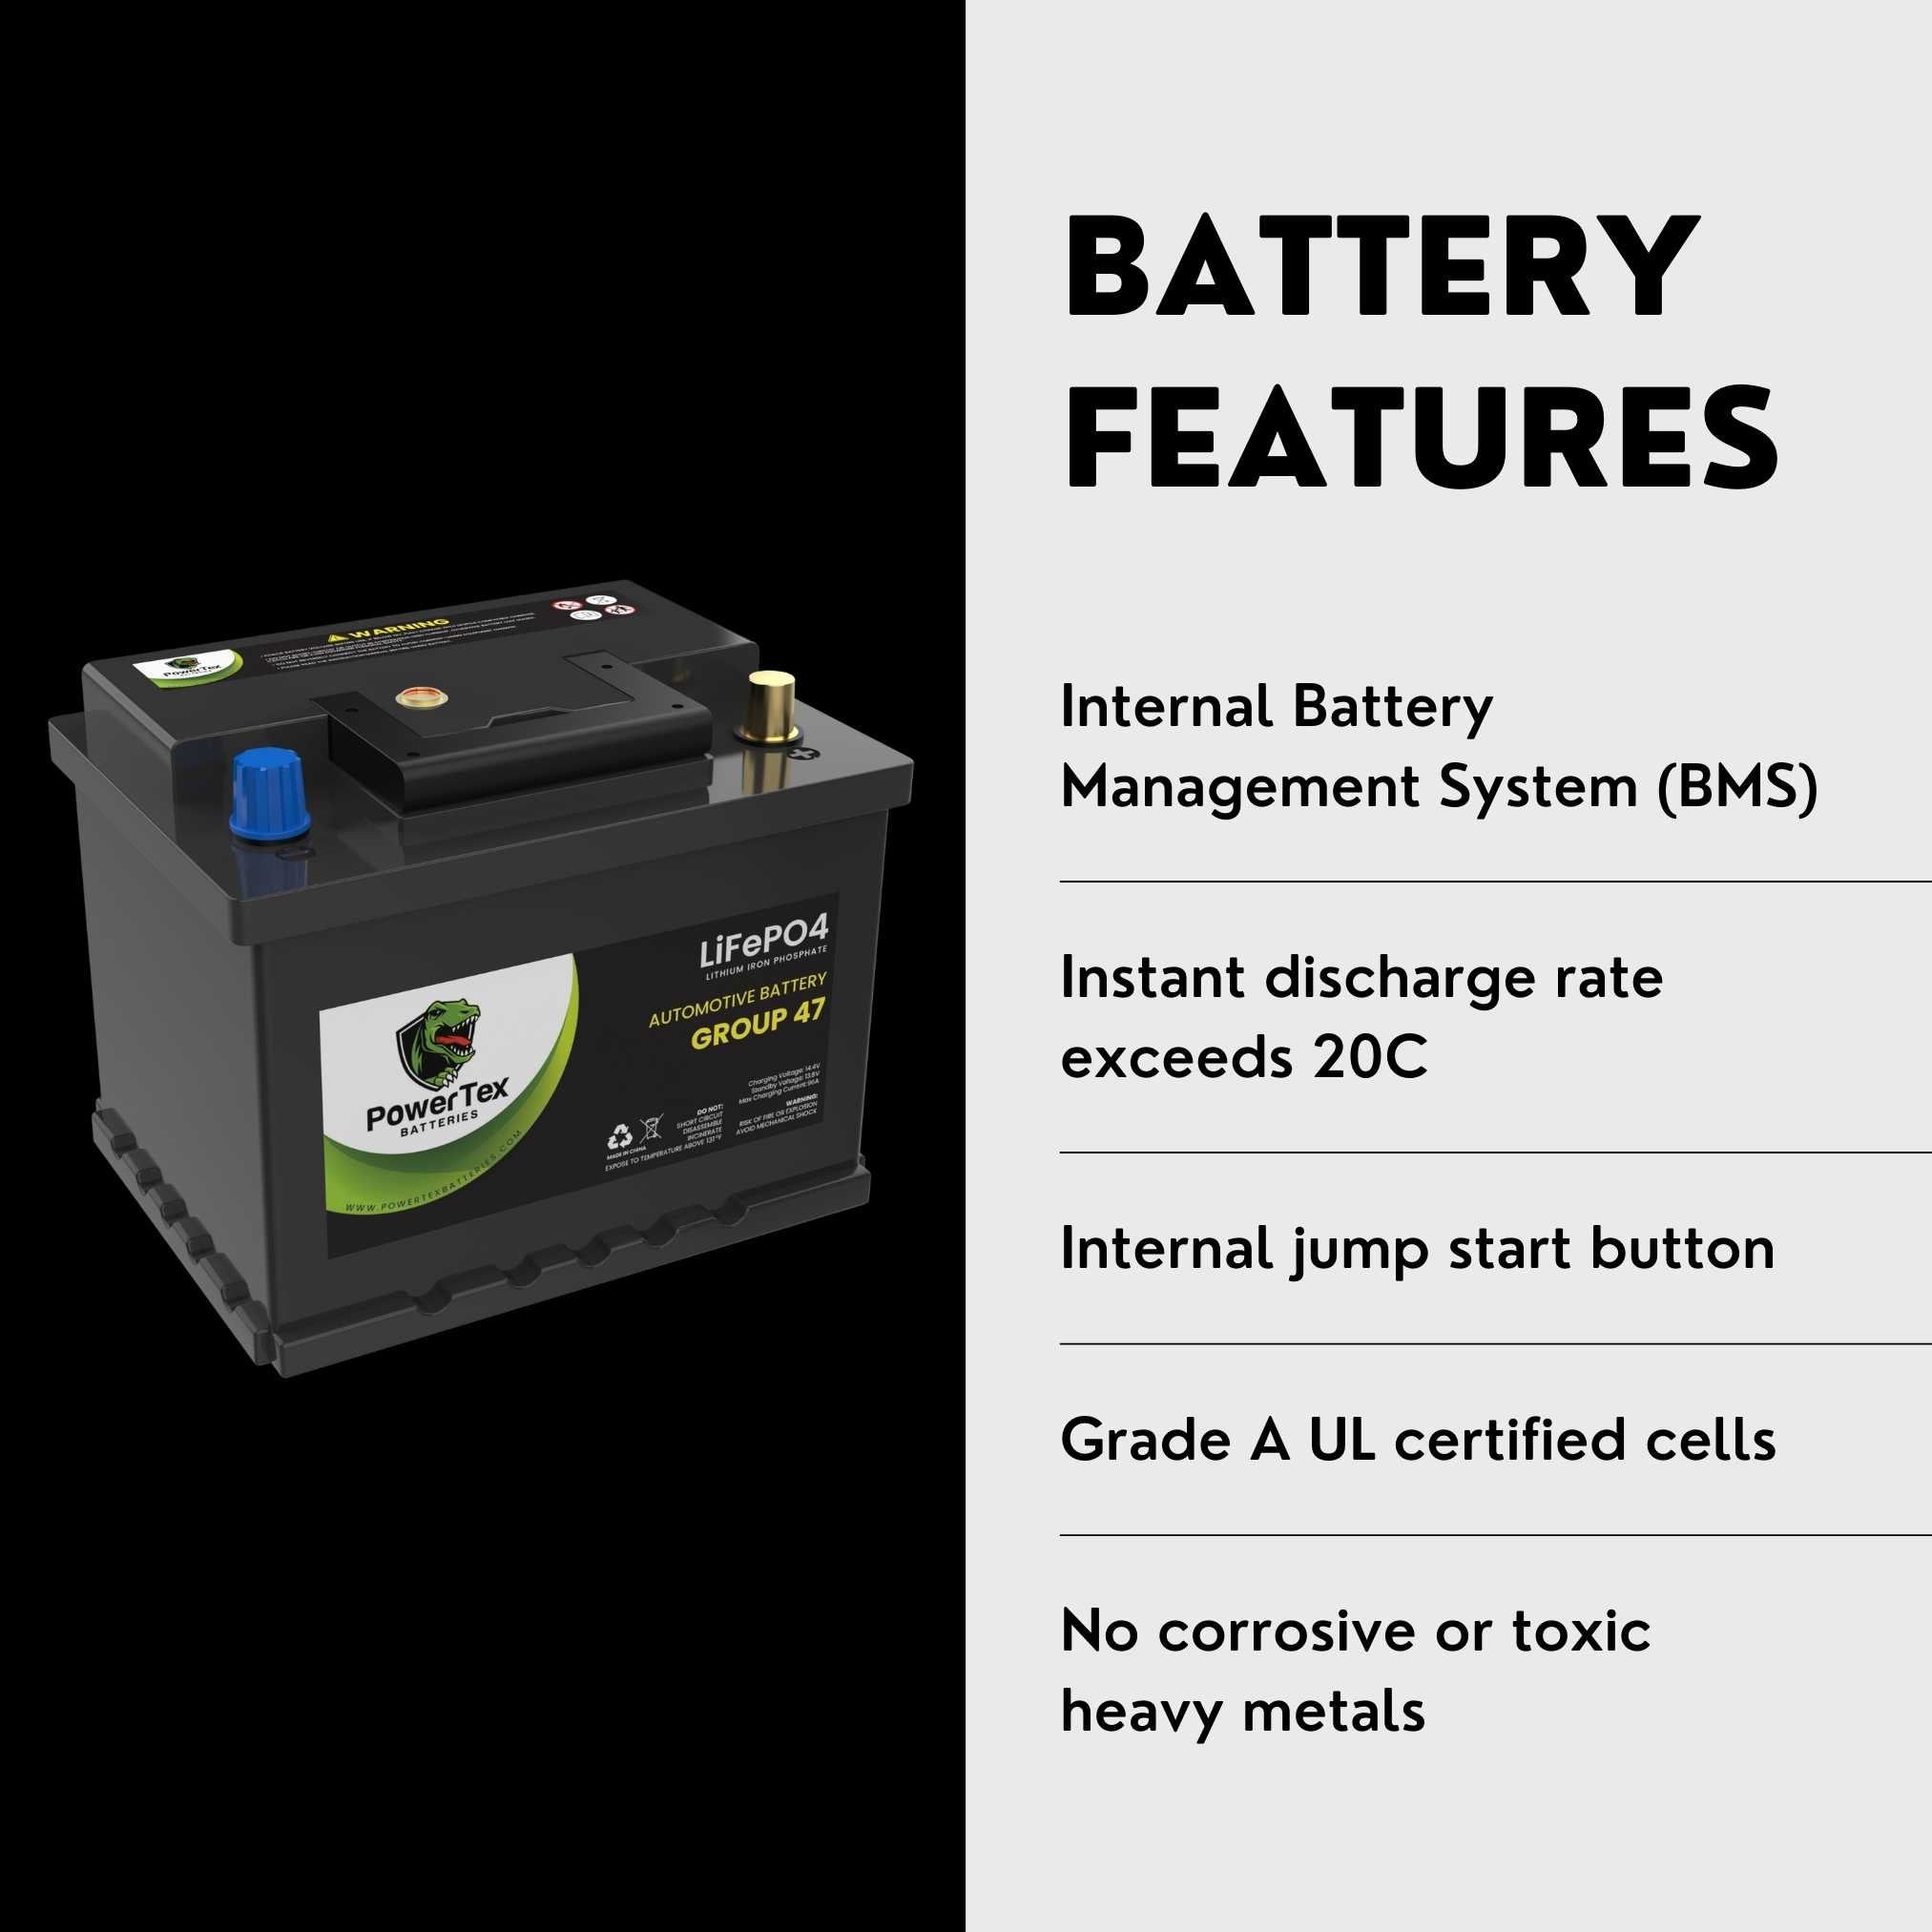 2009 Volkswagen Jetta City Car Battery BCI Group 47 H5 Lithium LiFePO4 Automotive Battery